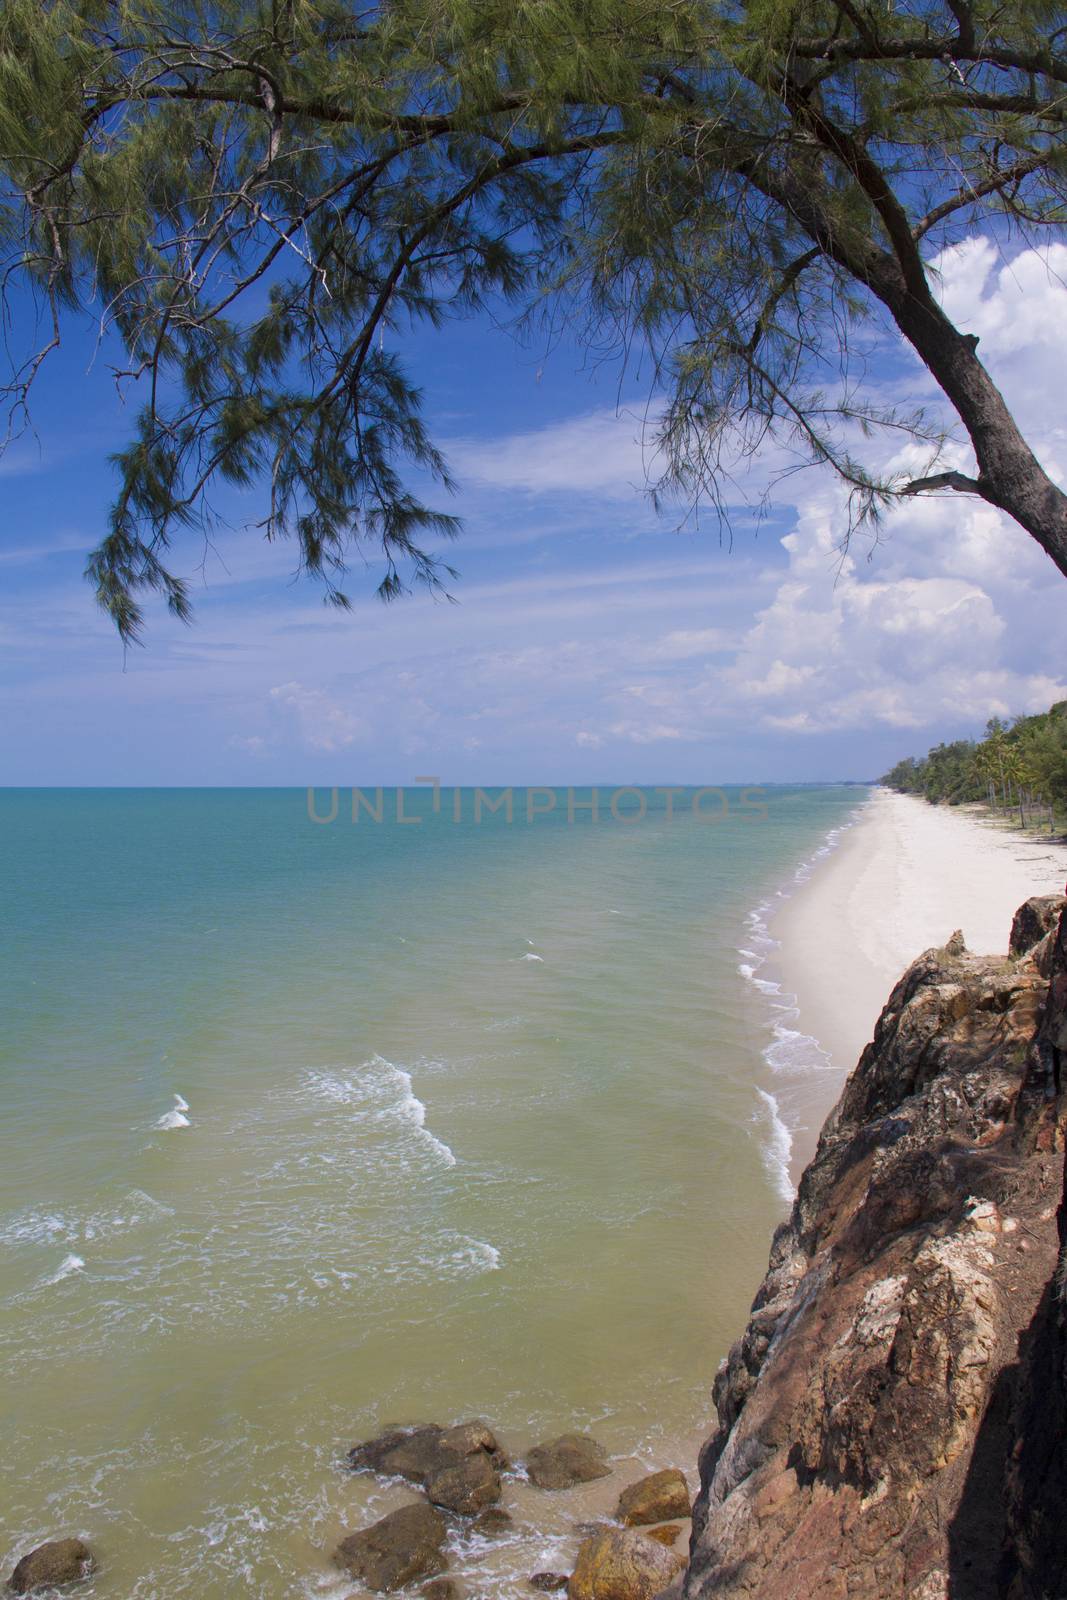 Sakom beach , A Separated sea of songkhla Thailand.